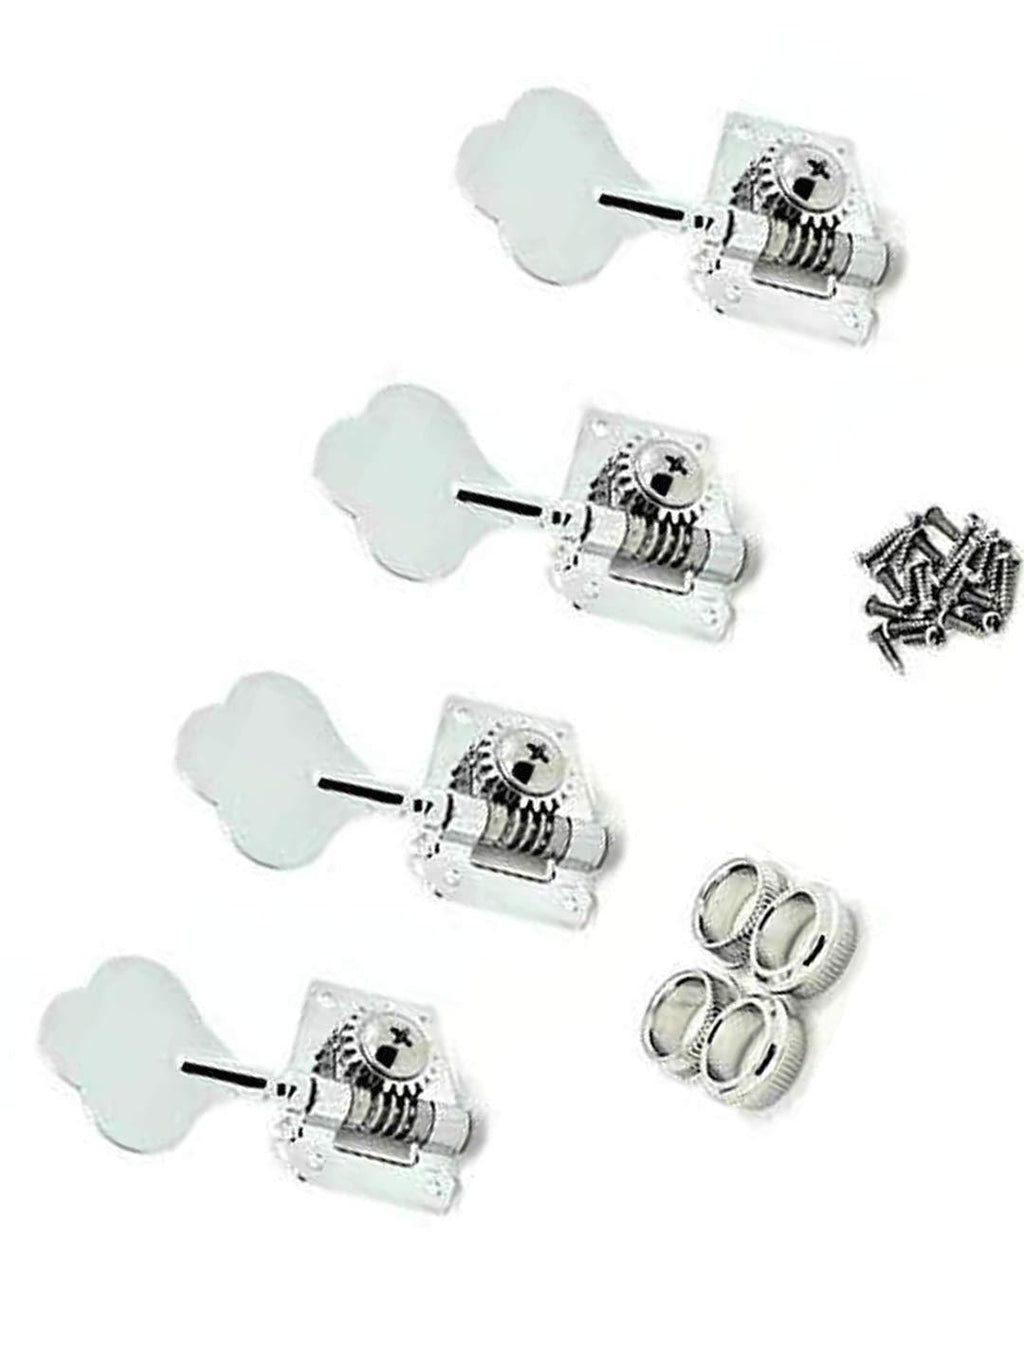 4-in-line 4R Vintage Open Gear Bass Tuners Machine Head Tuning Keys Pegs Set Right Hand for Jazz Precision P Bass Replacement, Chrome